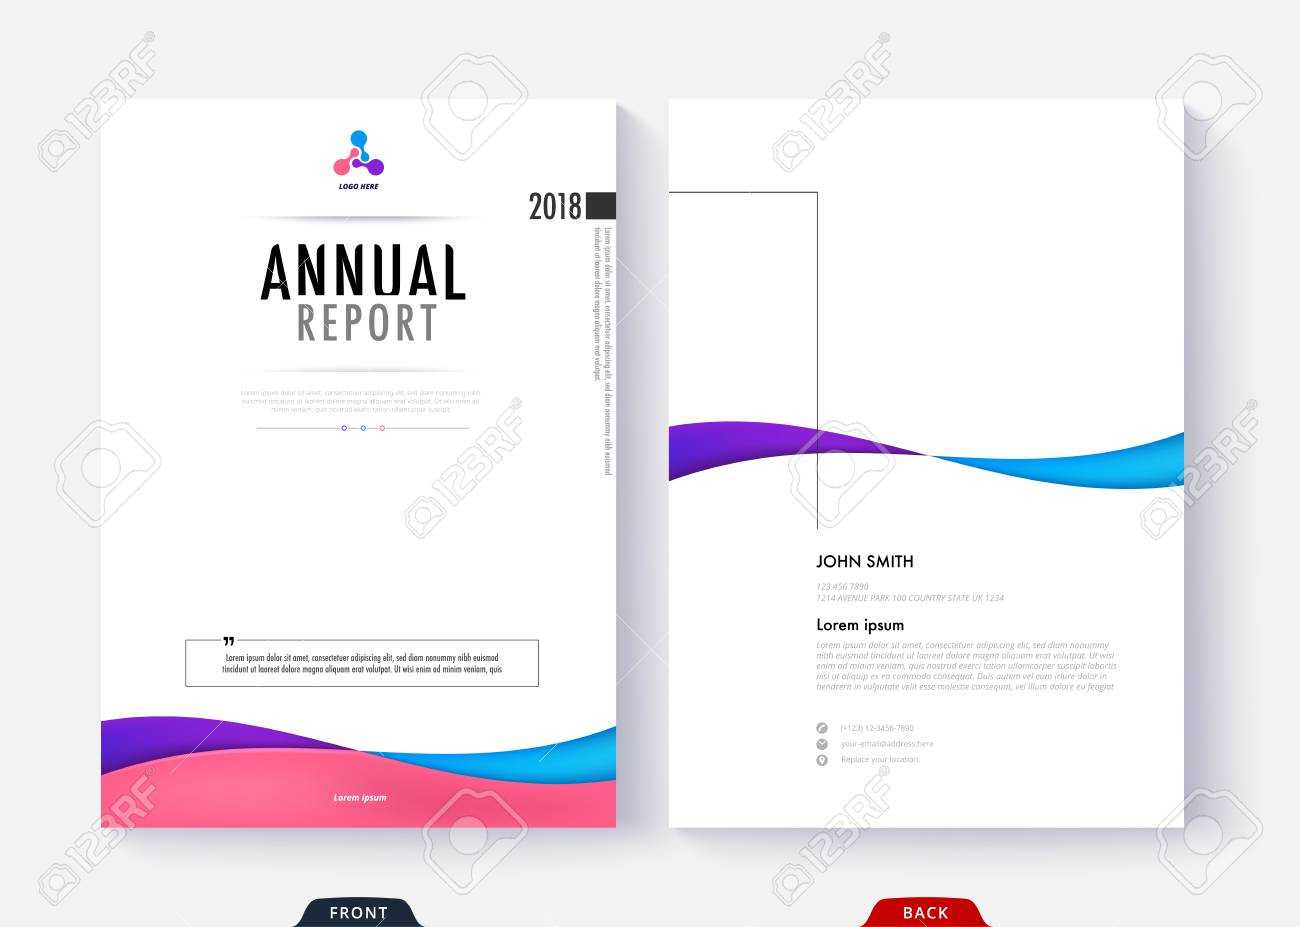 024 Report Cover Page Template Annual Design For Business For Cover Page For Annual Report Template